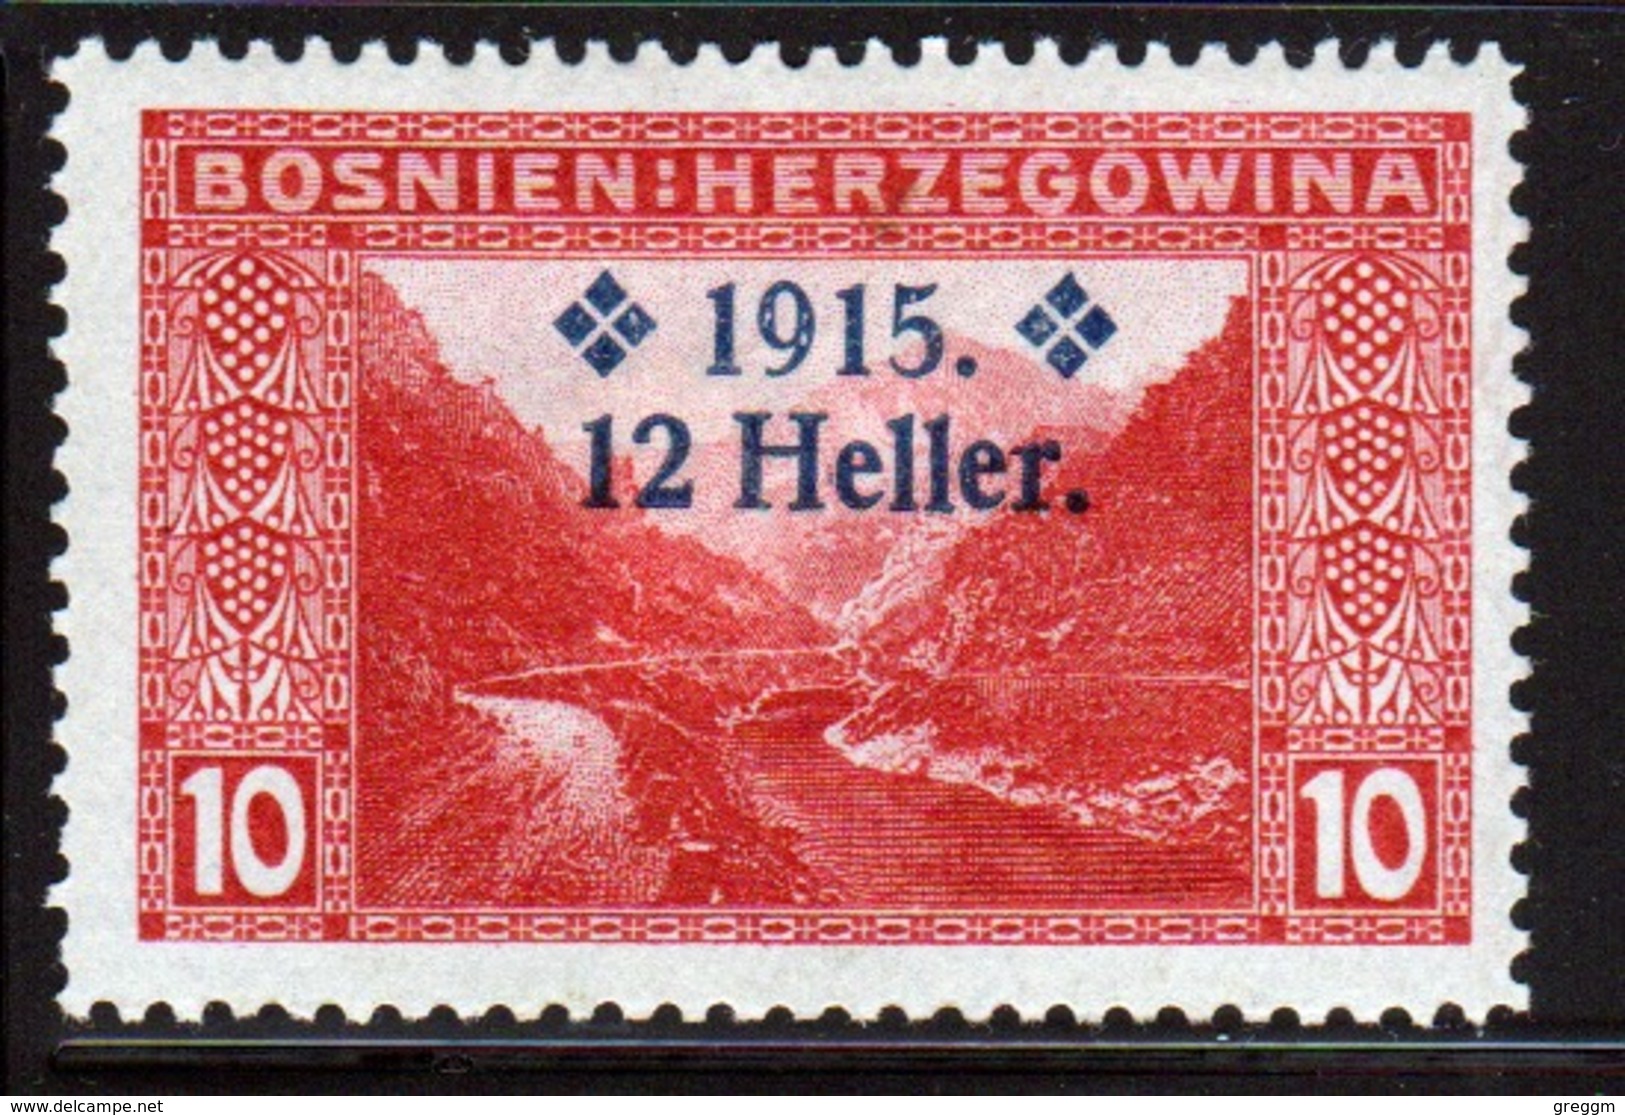 Bosnia 12 Heller Overprinted On 10 Heller Red Stamp From 1915  And In Mounted Mint Condition. - Bosnia And Herzegovina